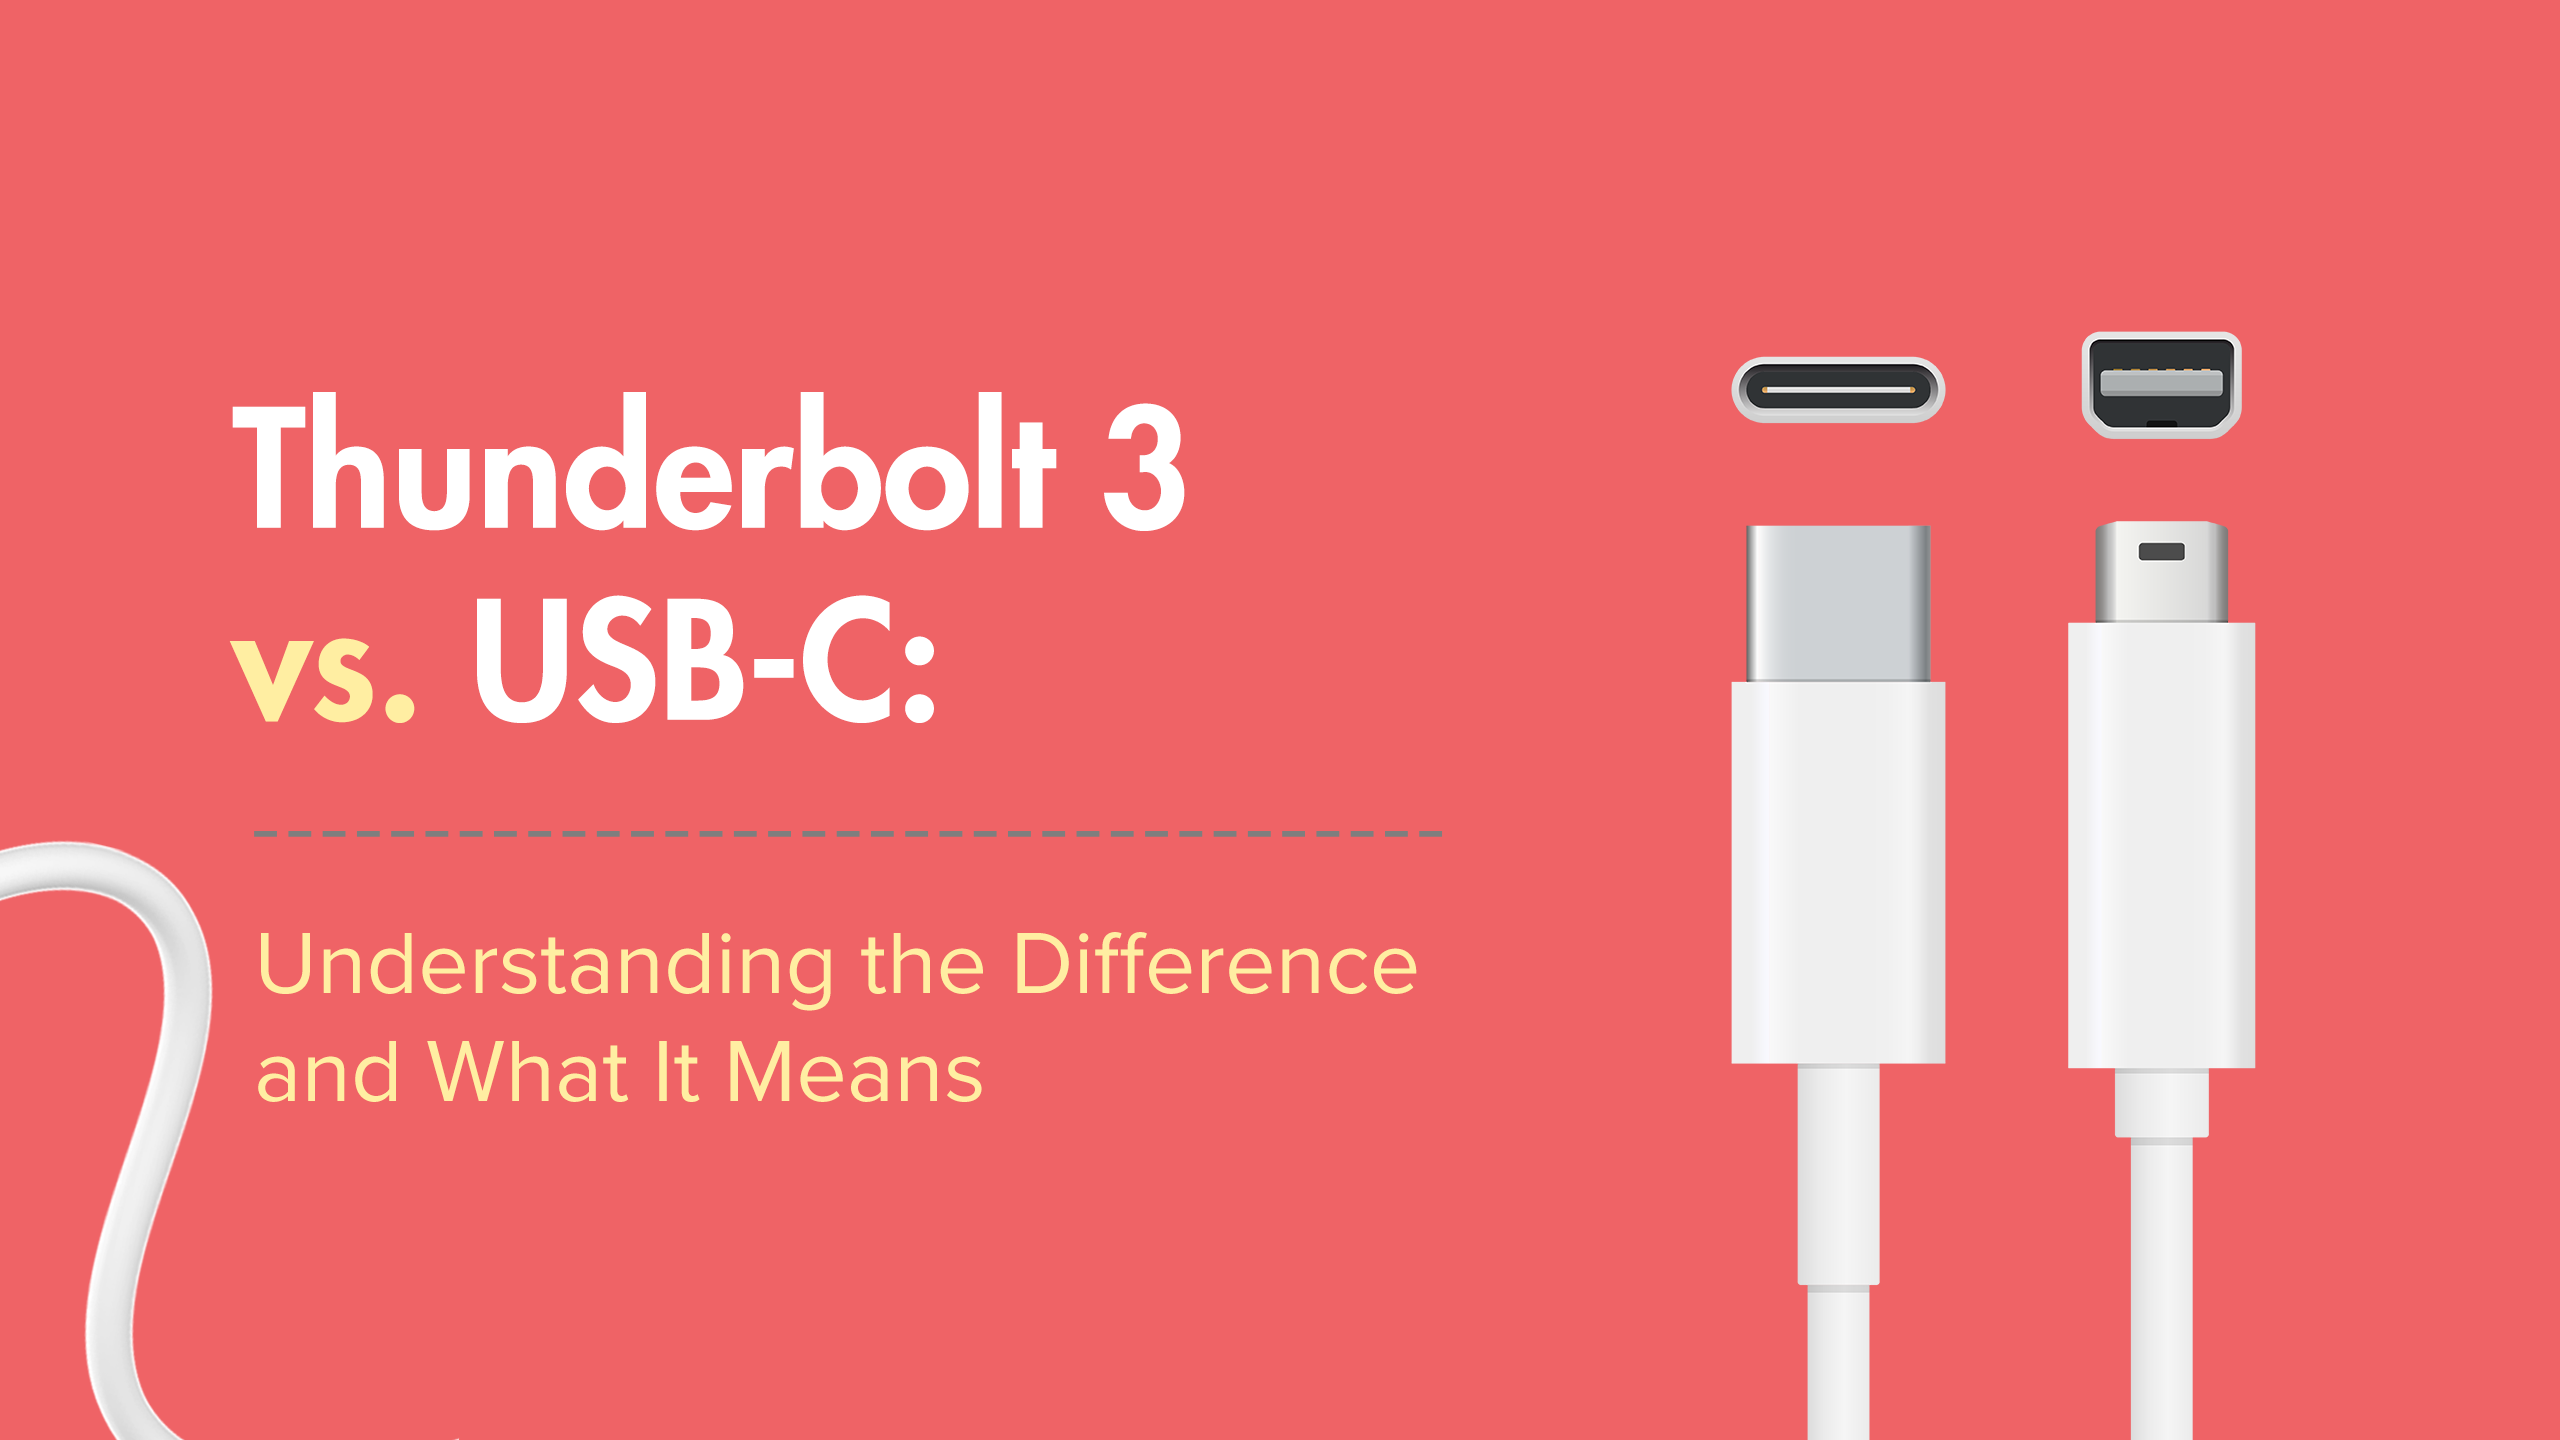 Everything you need to know about USB-C & Thunderbolt 3 on Apple's